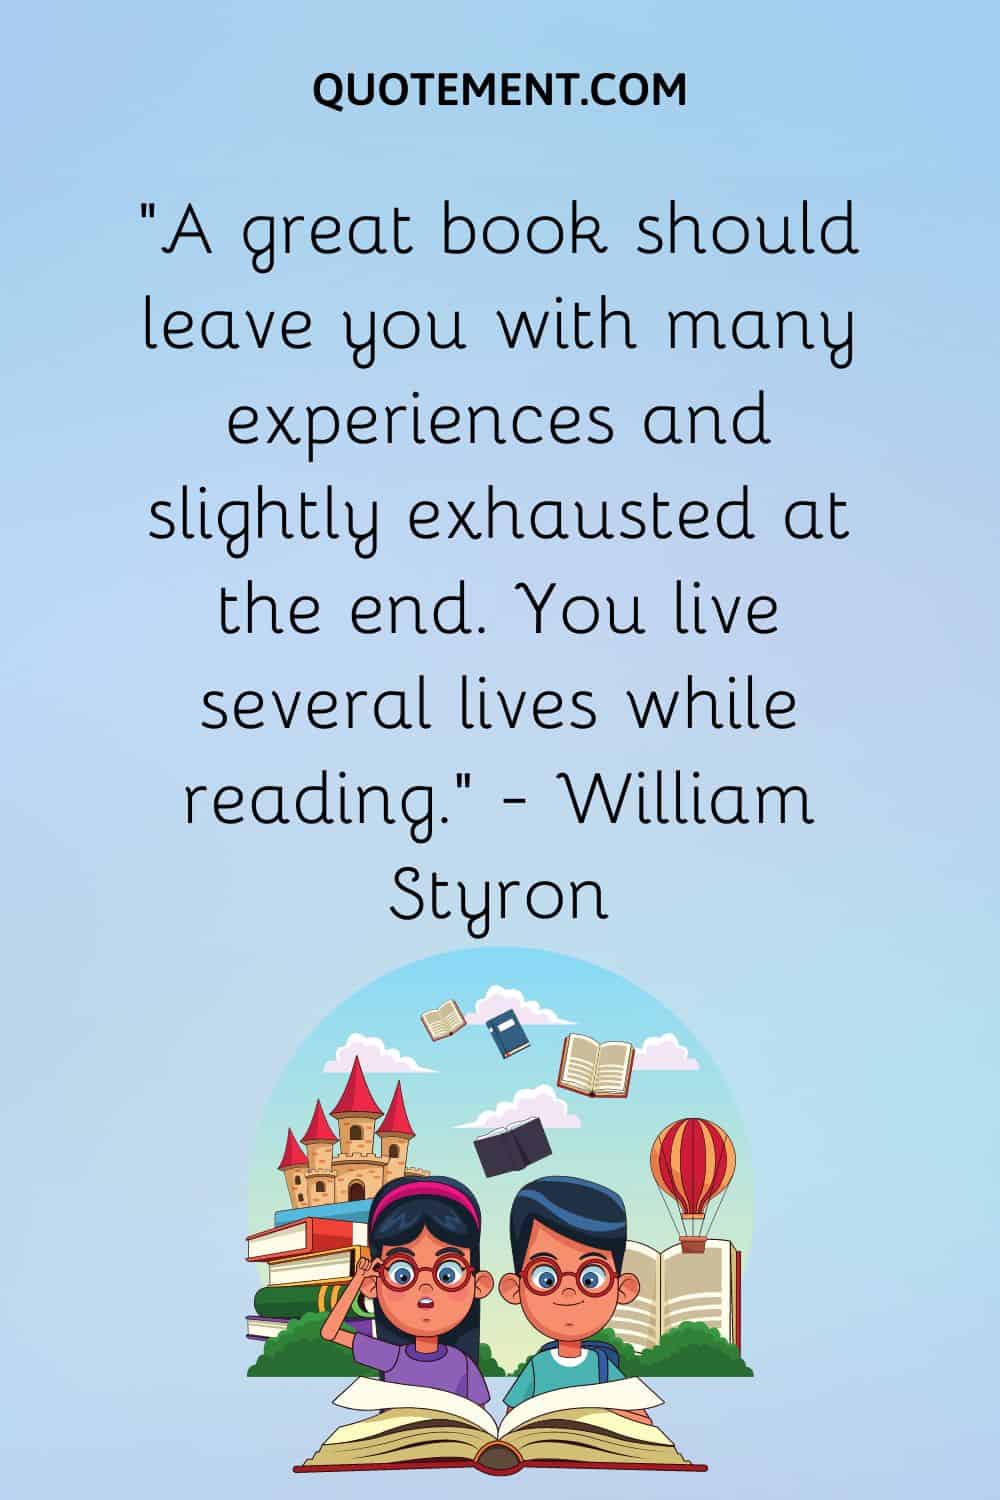 “A great book should leave you with many experiences and slightly exhausted at the end. You live several lives while reading.” — William Styron